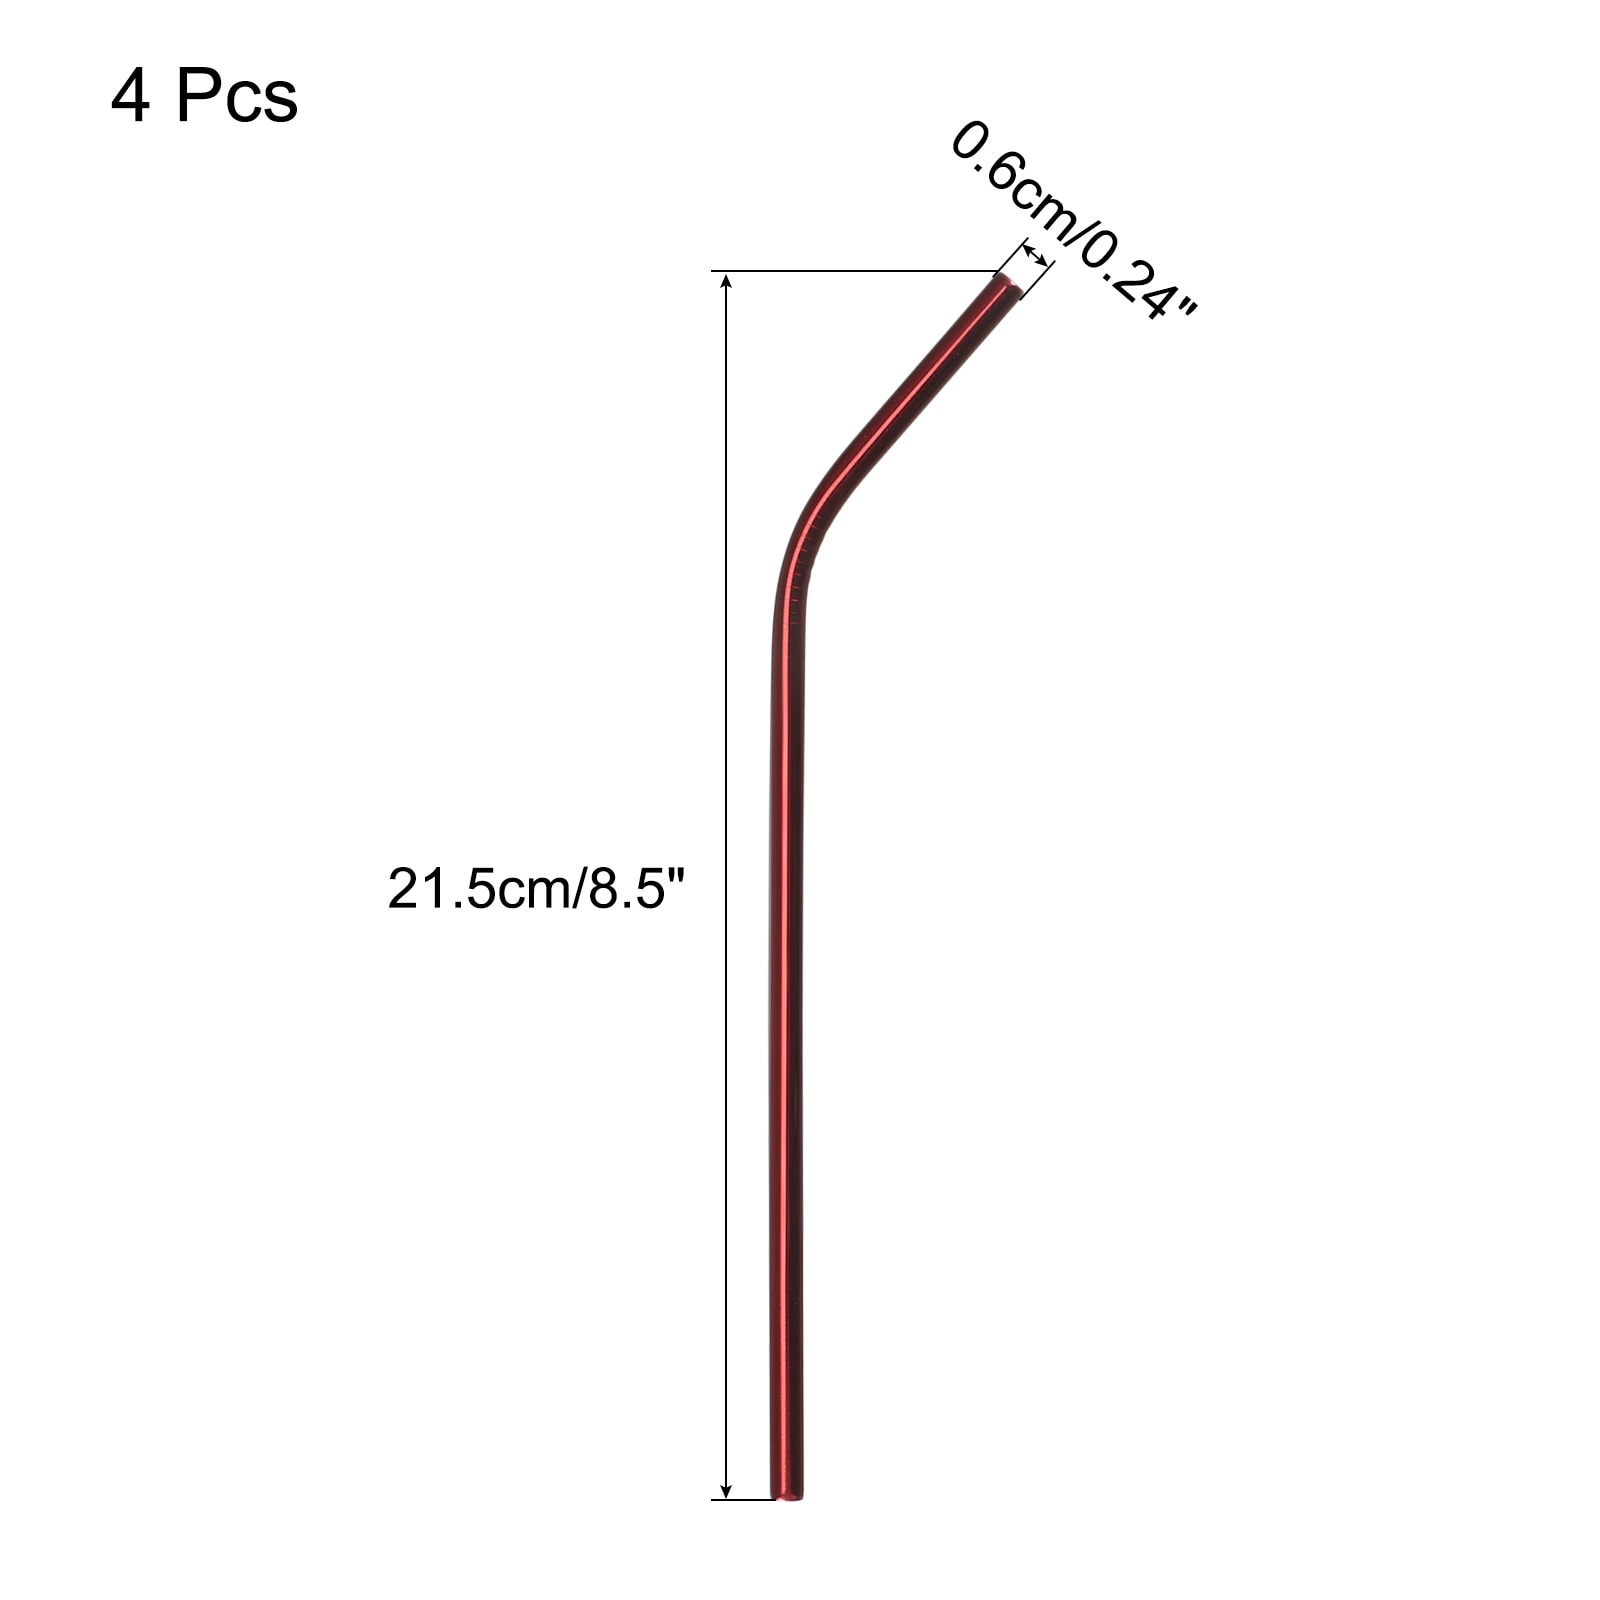 4 Pcs Reusable Metal Drinking Straws 8.5 Inch Stainless Steel